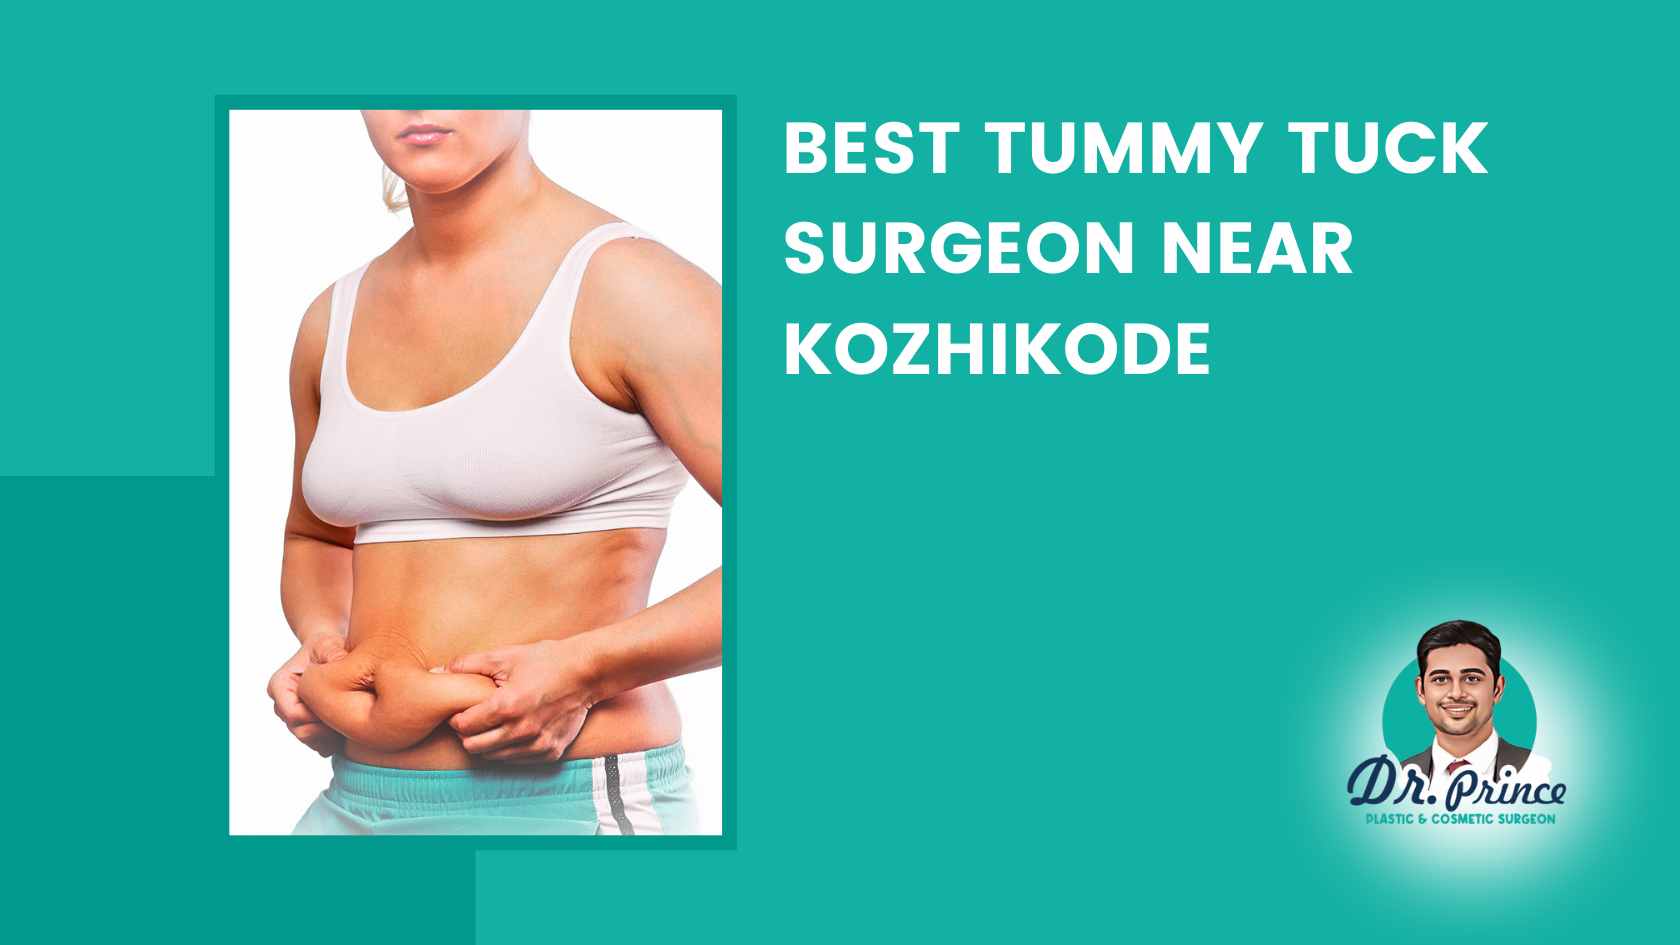 Dr. Prince, the top tummy tuck surgeon near Kozhikode, transforming lives at the Sushrutha Institute of Plastic Surgery.